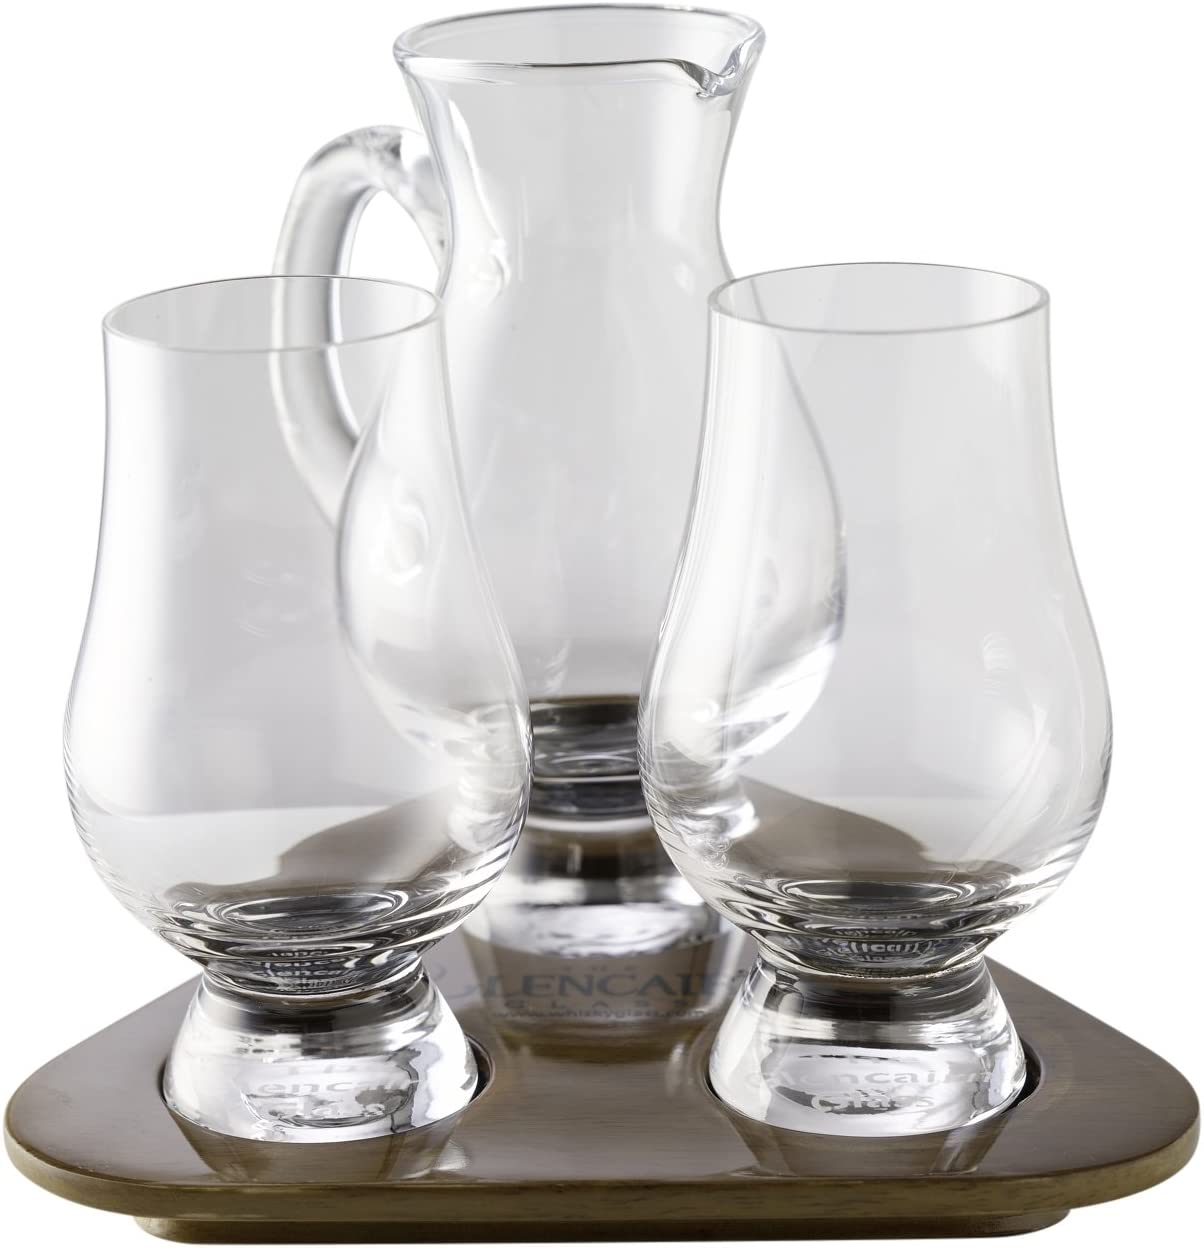 Stölzle the Glencairn Whiskey Glass Tasting Set of 2 Glasses Wooden Tray and Water Jug